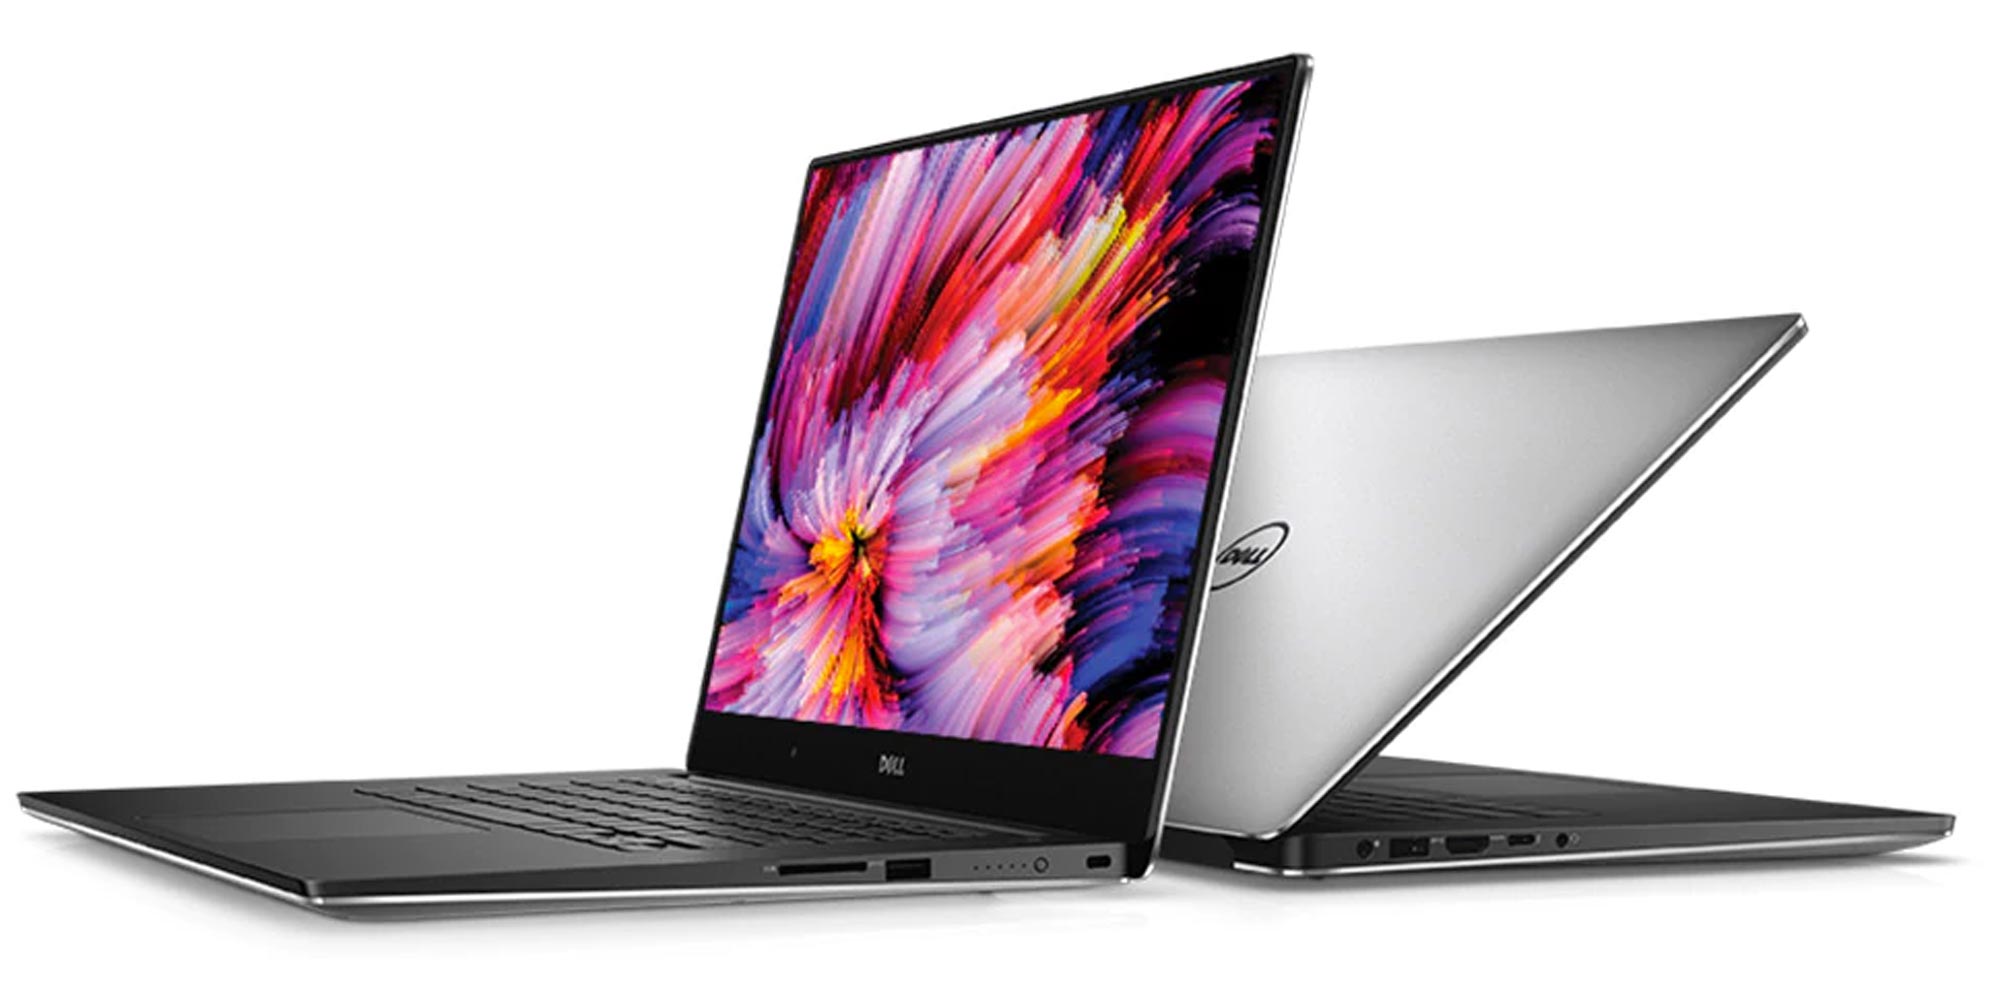 Upgrade to Dell's 4K XPS 15 w/ i5/8GB/256GB & GTX 1050 for $900 (Reg